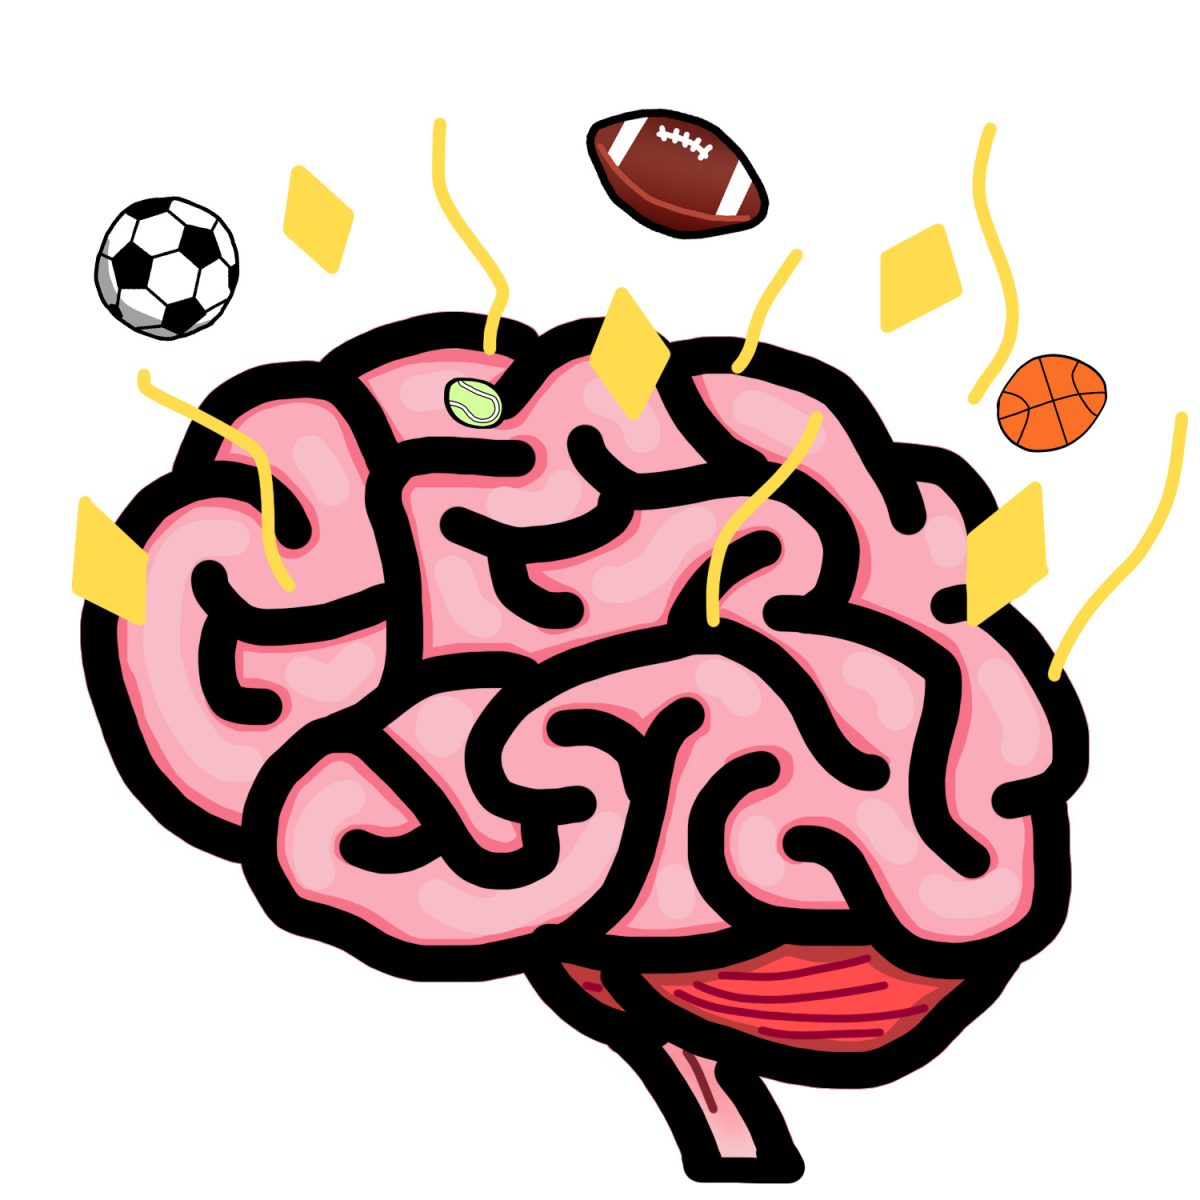 An artistic interpretation of how watching and participating in sports creates a sense of eustress. This feeling is the scientific reason why people are so infatuated with sports and sports entertainment.